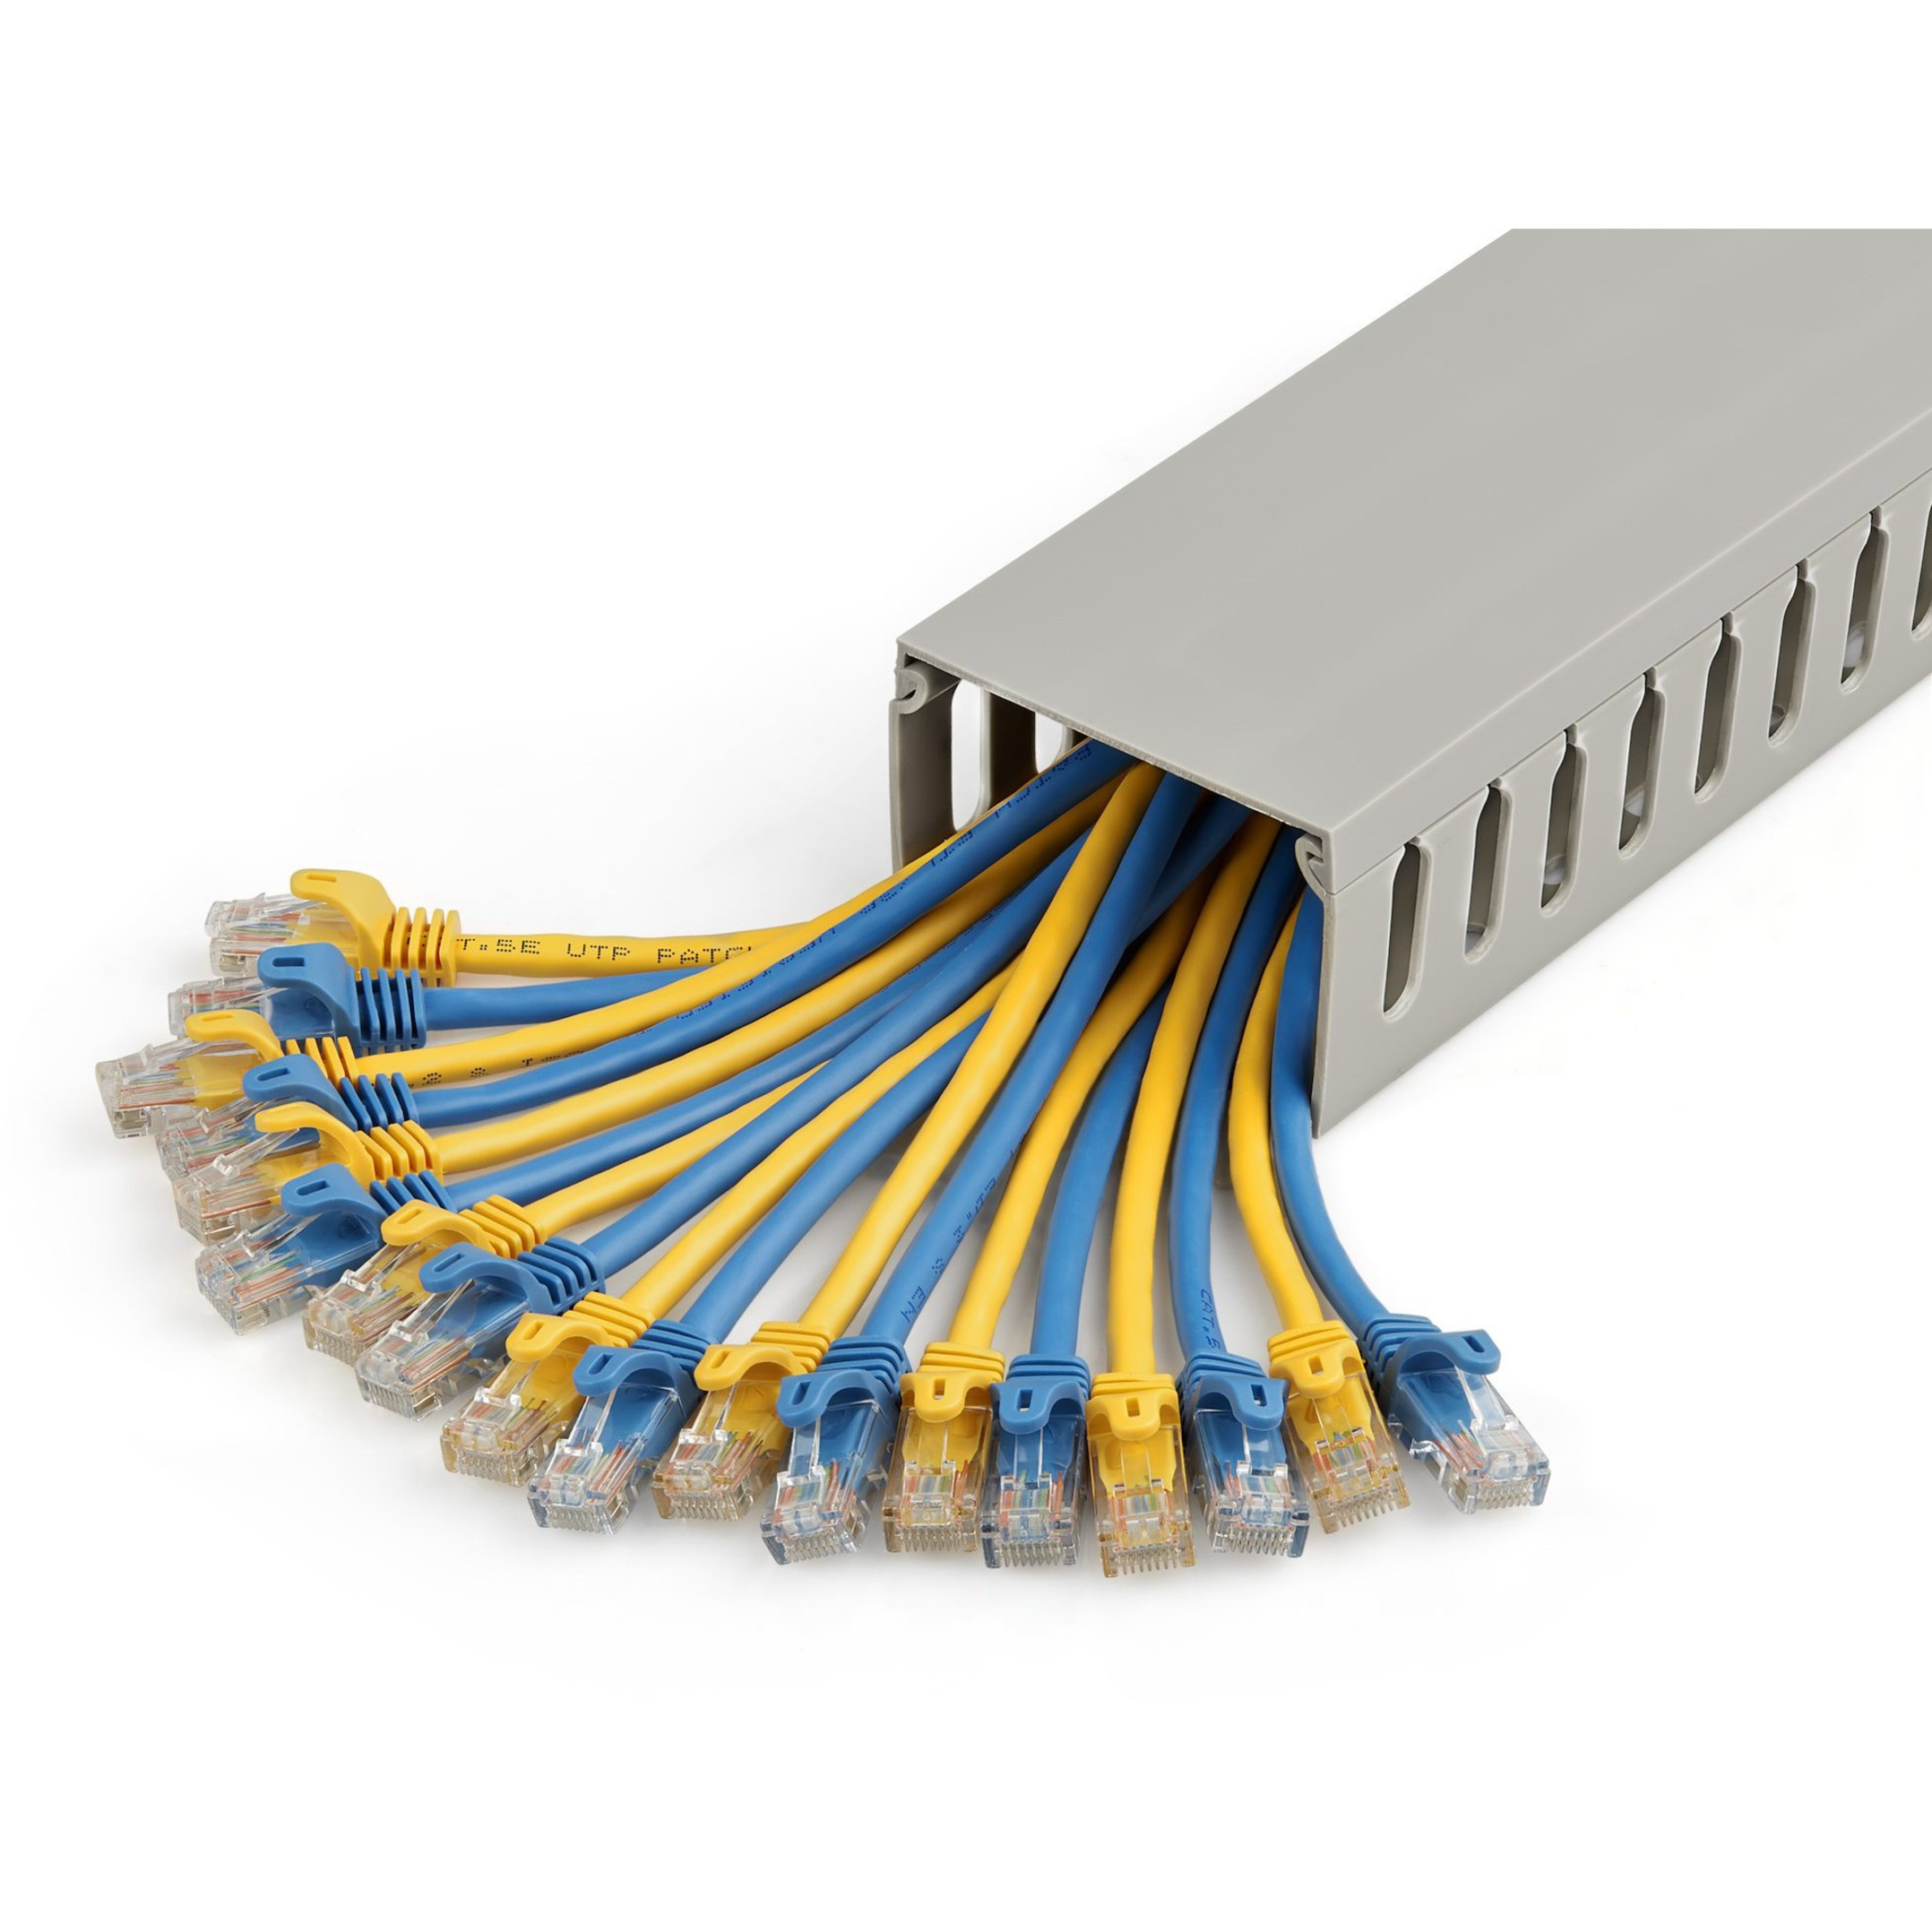 Startech .com Cable Management Raceway with Cover 3(75mm)W x 2(50mm)H,  6.5ft(2m) length, 3/8(8mm) Slots, Wall Wire Duct, UL ListedCable m  CBMWD7550 - Corporate Armor